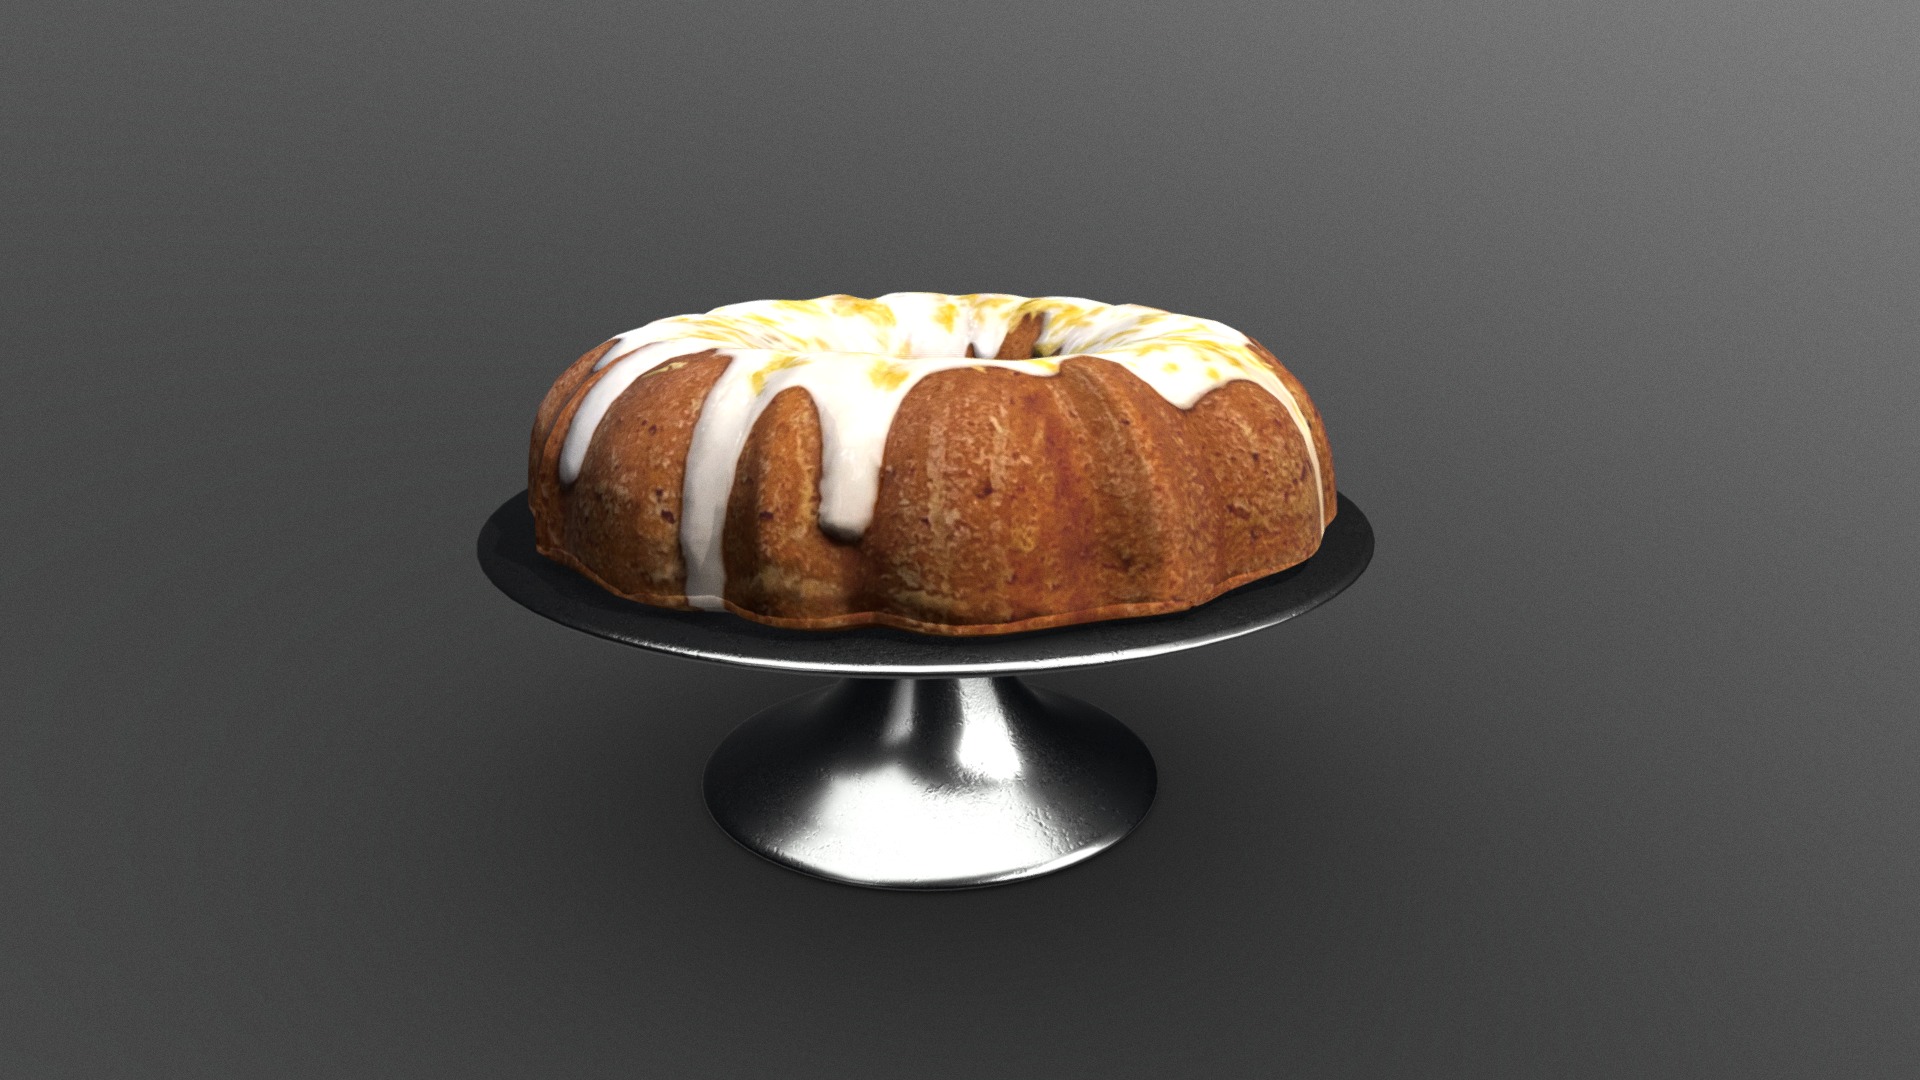 3D model Bundt Cake on Metal Cake Stand with White Icing - This is a 3D model of the Bundt Cake on Metal Cake Stand with White Icing. The 3D model is about a plate of food.